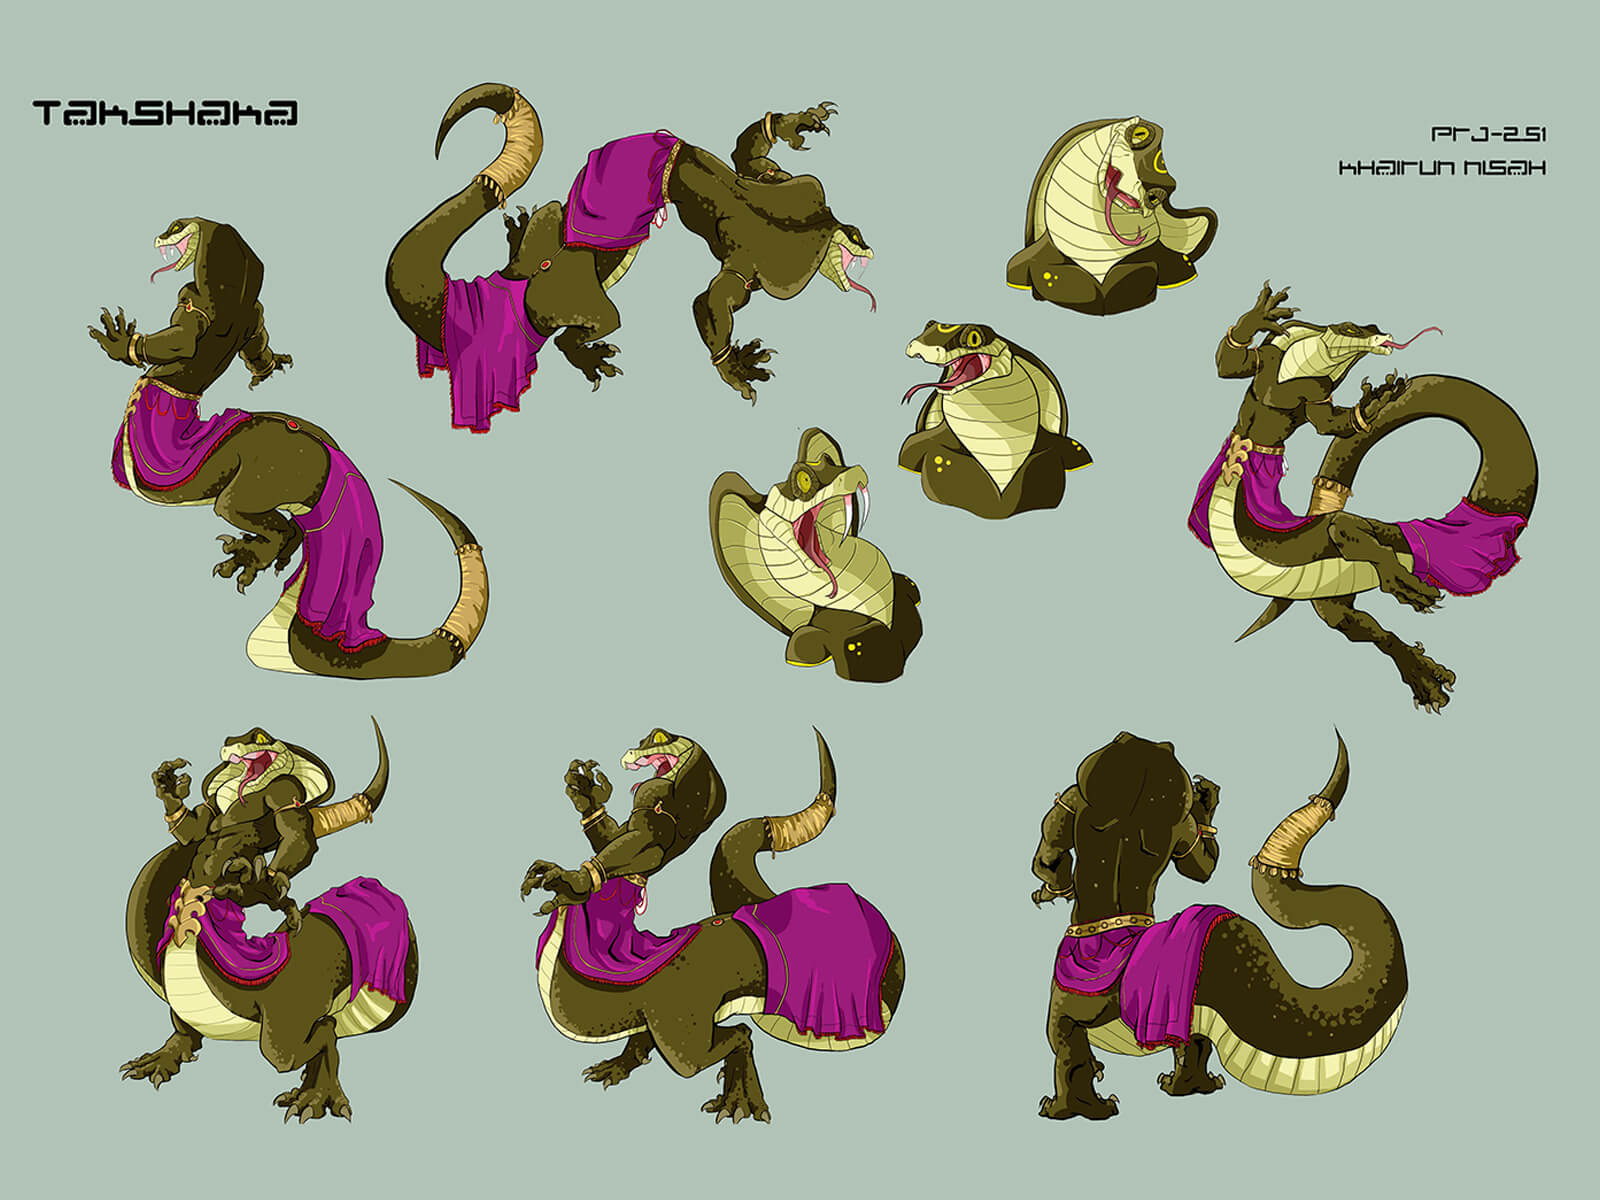 Character sketches of a green naga-like creature in a purple skirt as it dances and delivers various reactions.